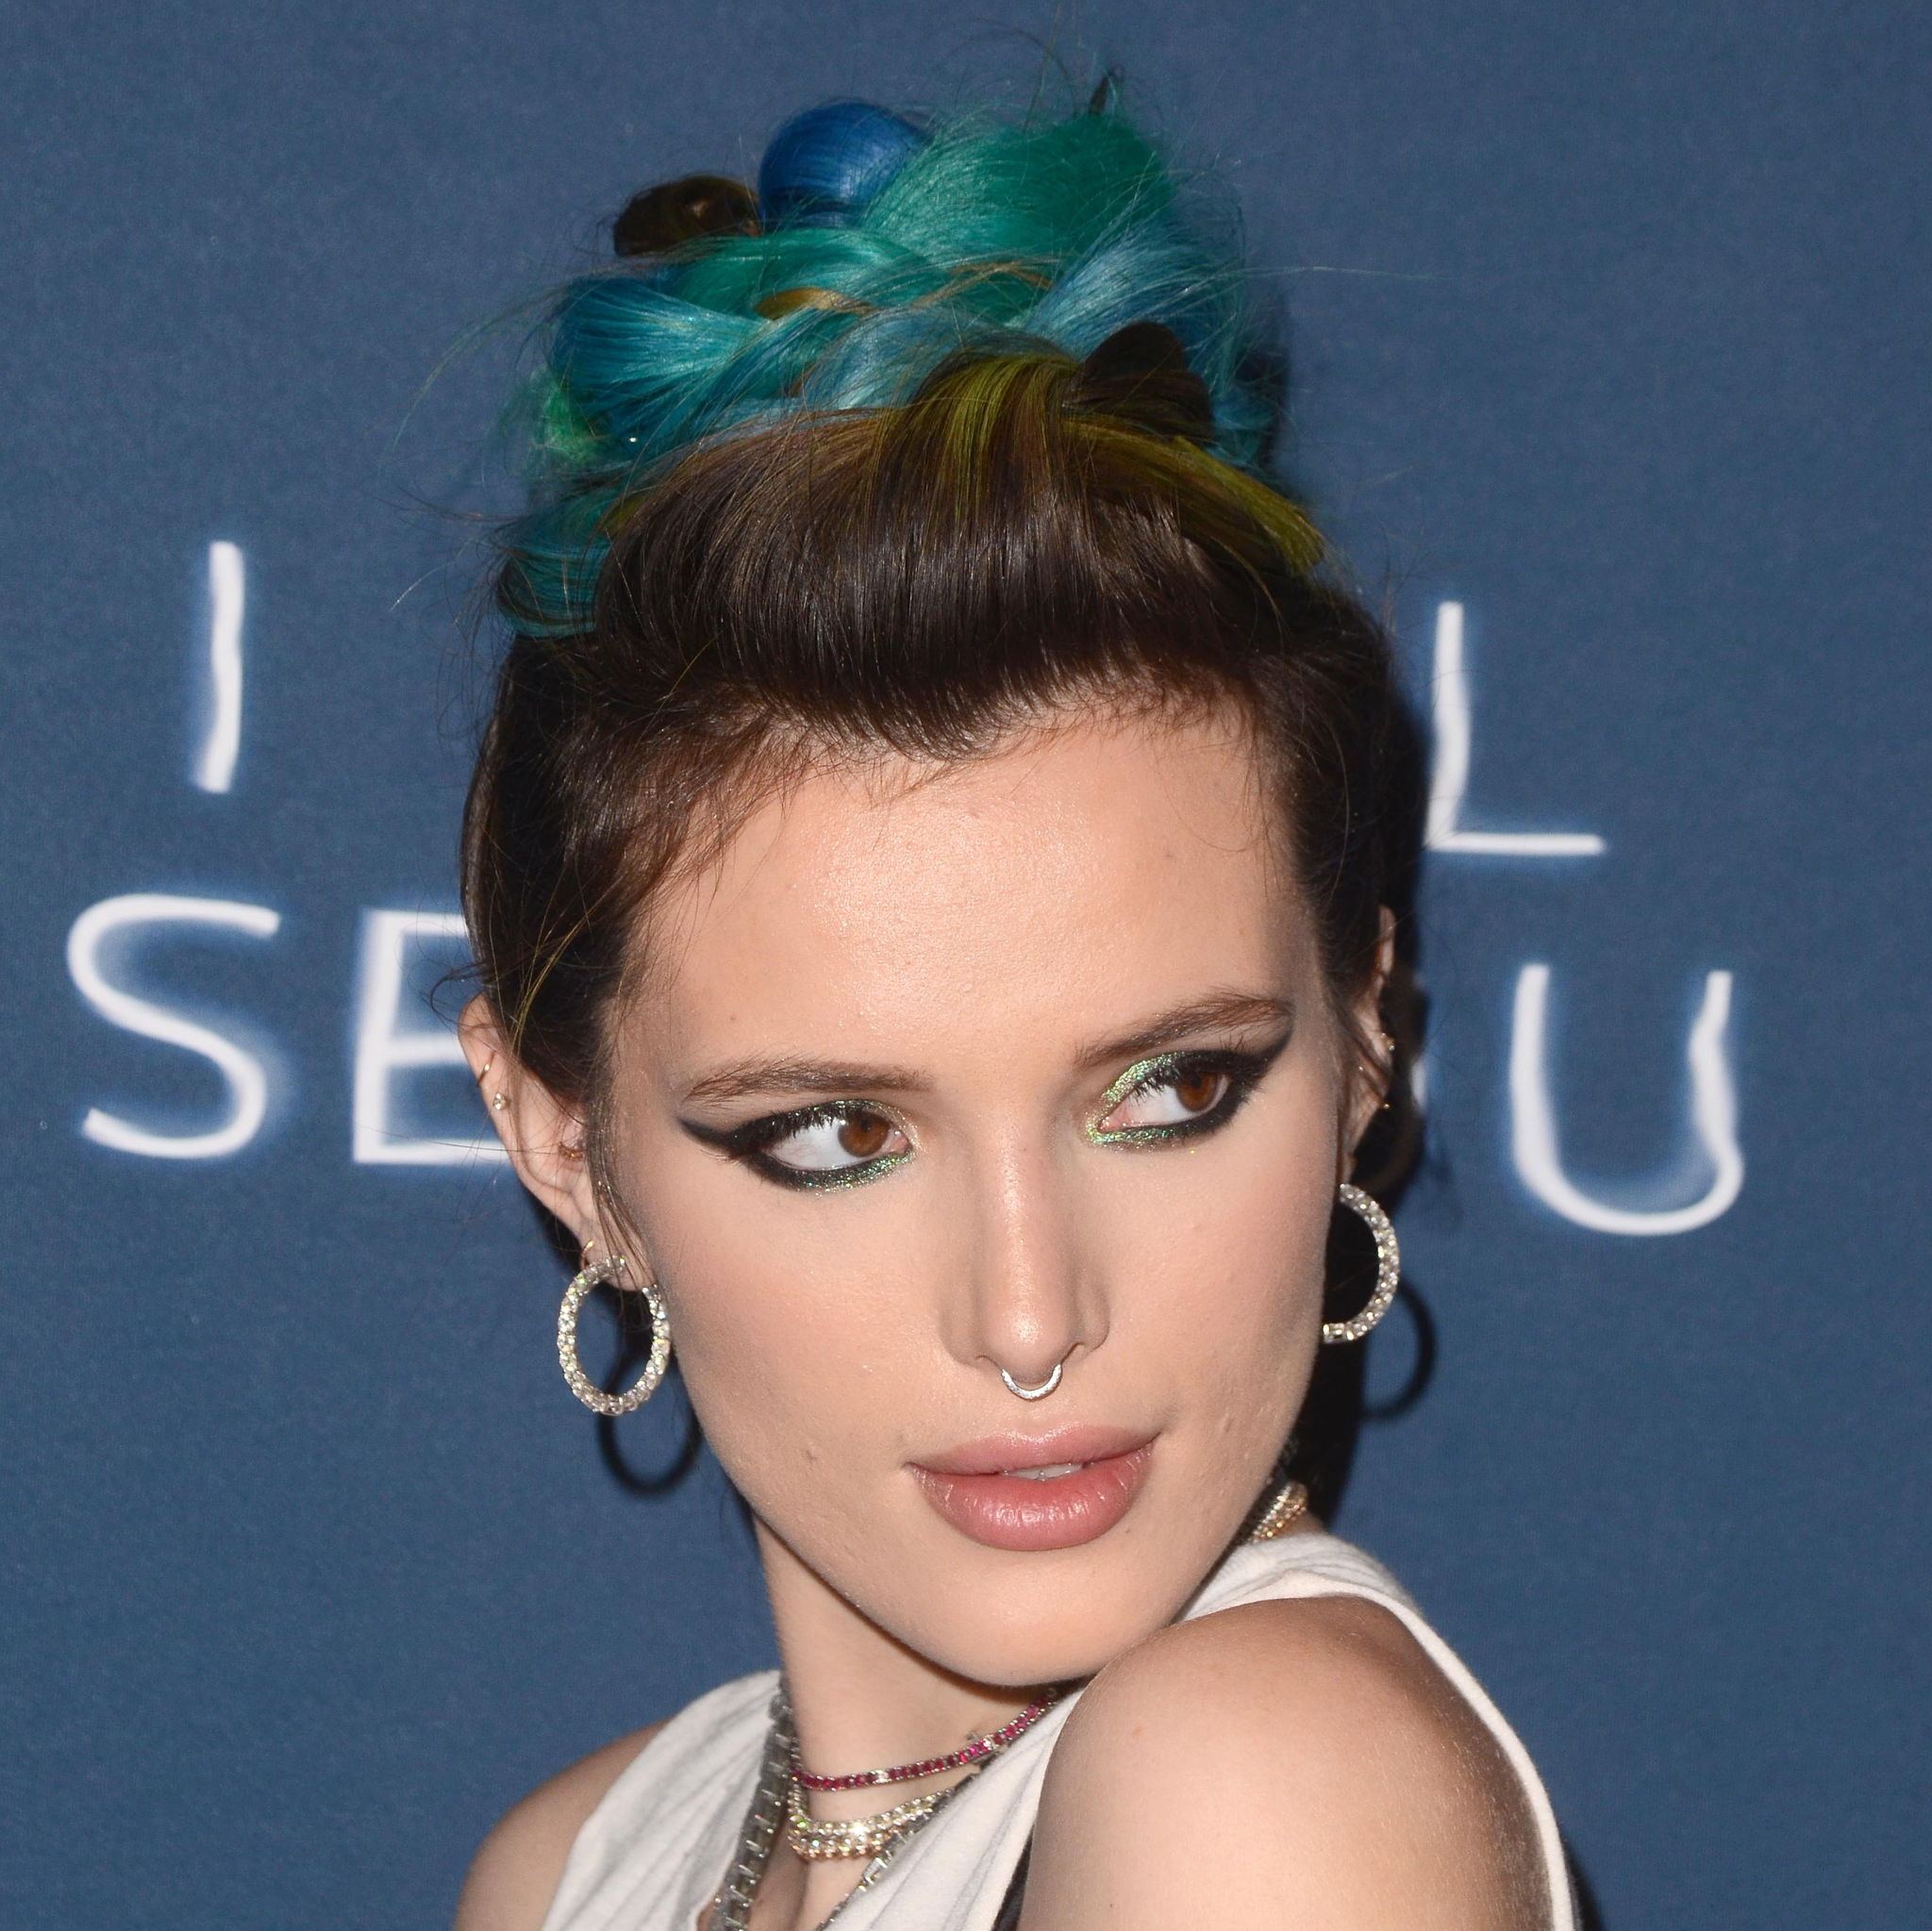 Bella Thorne posing while at a press event wearing a dress and blue hair.